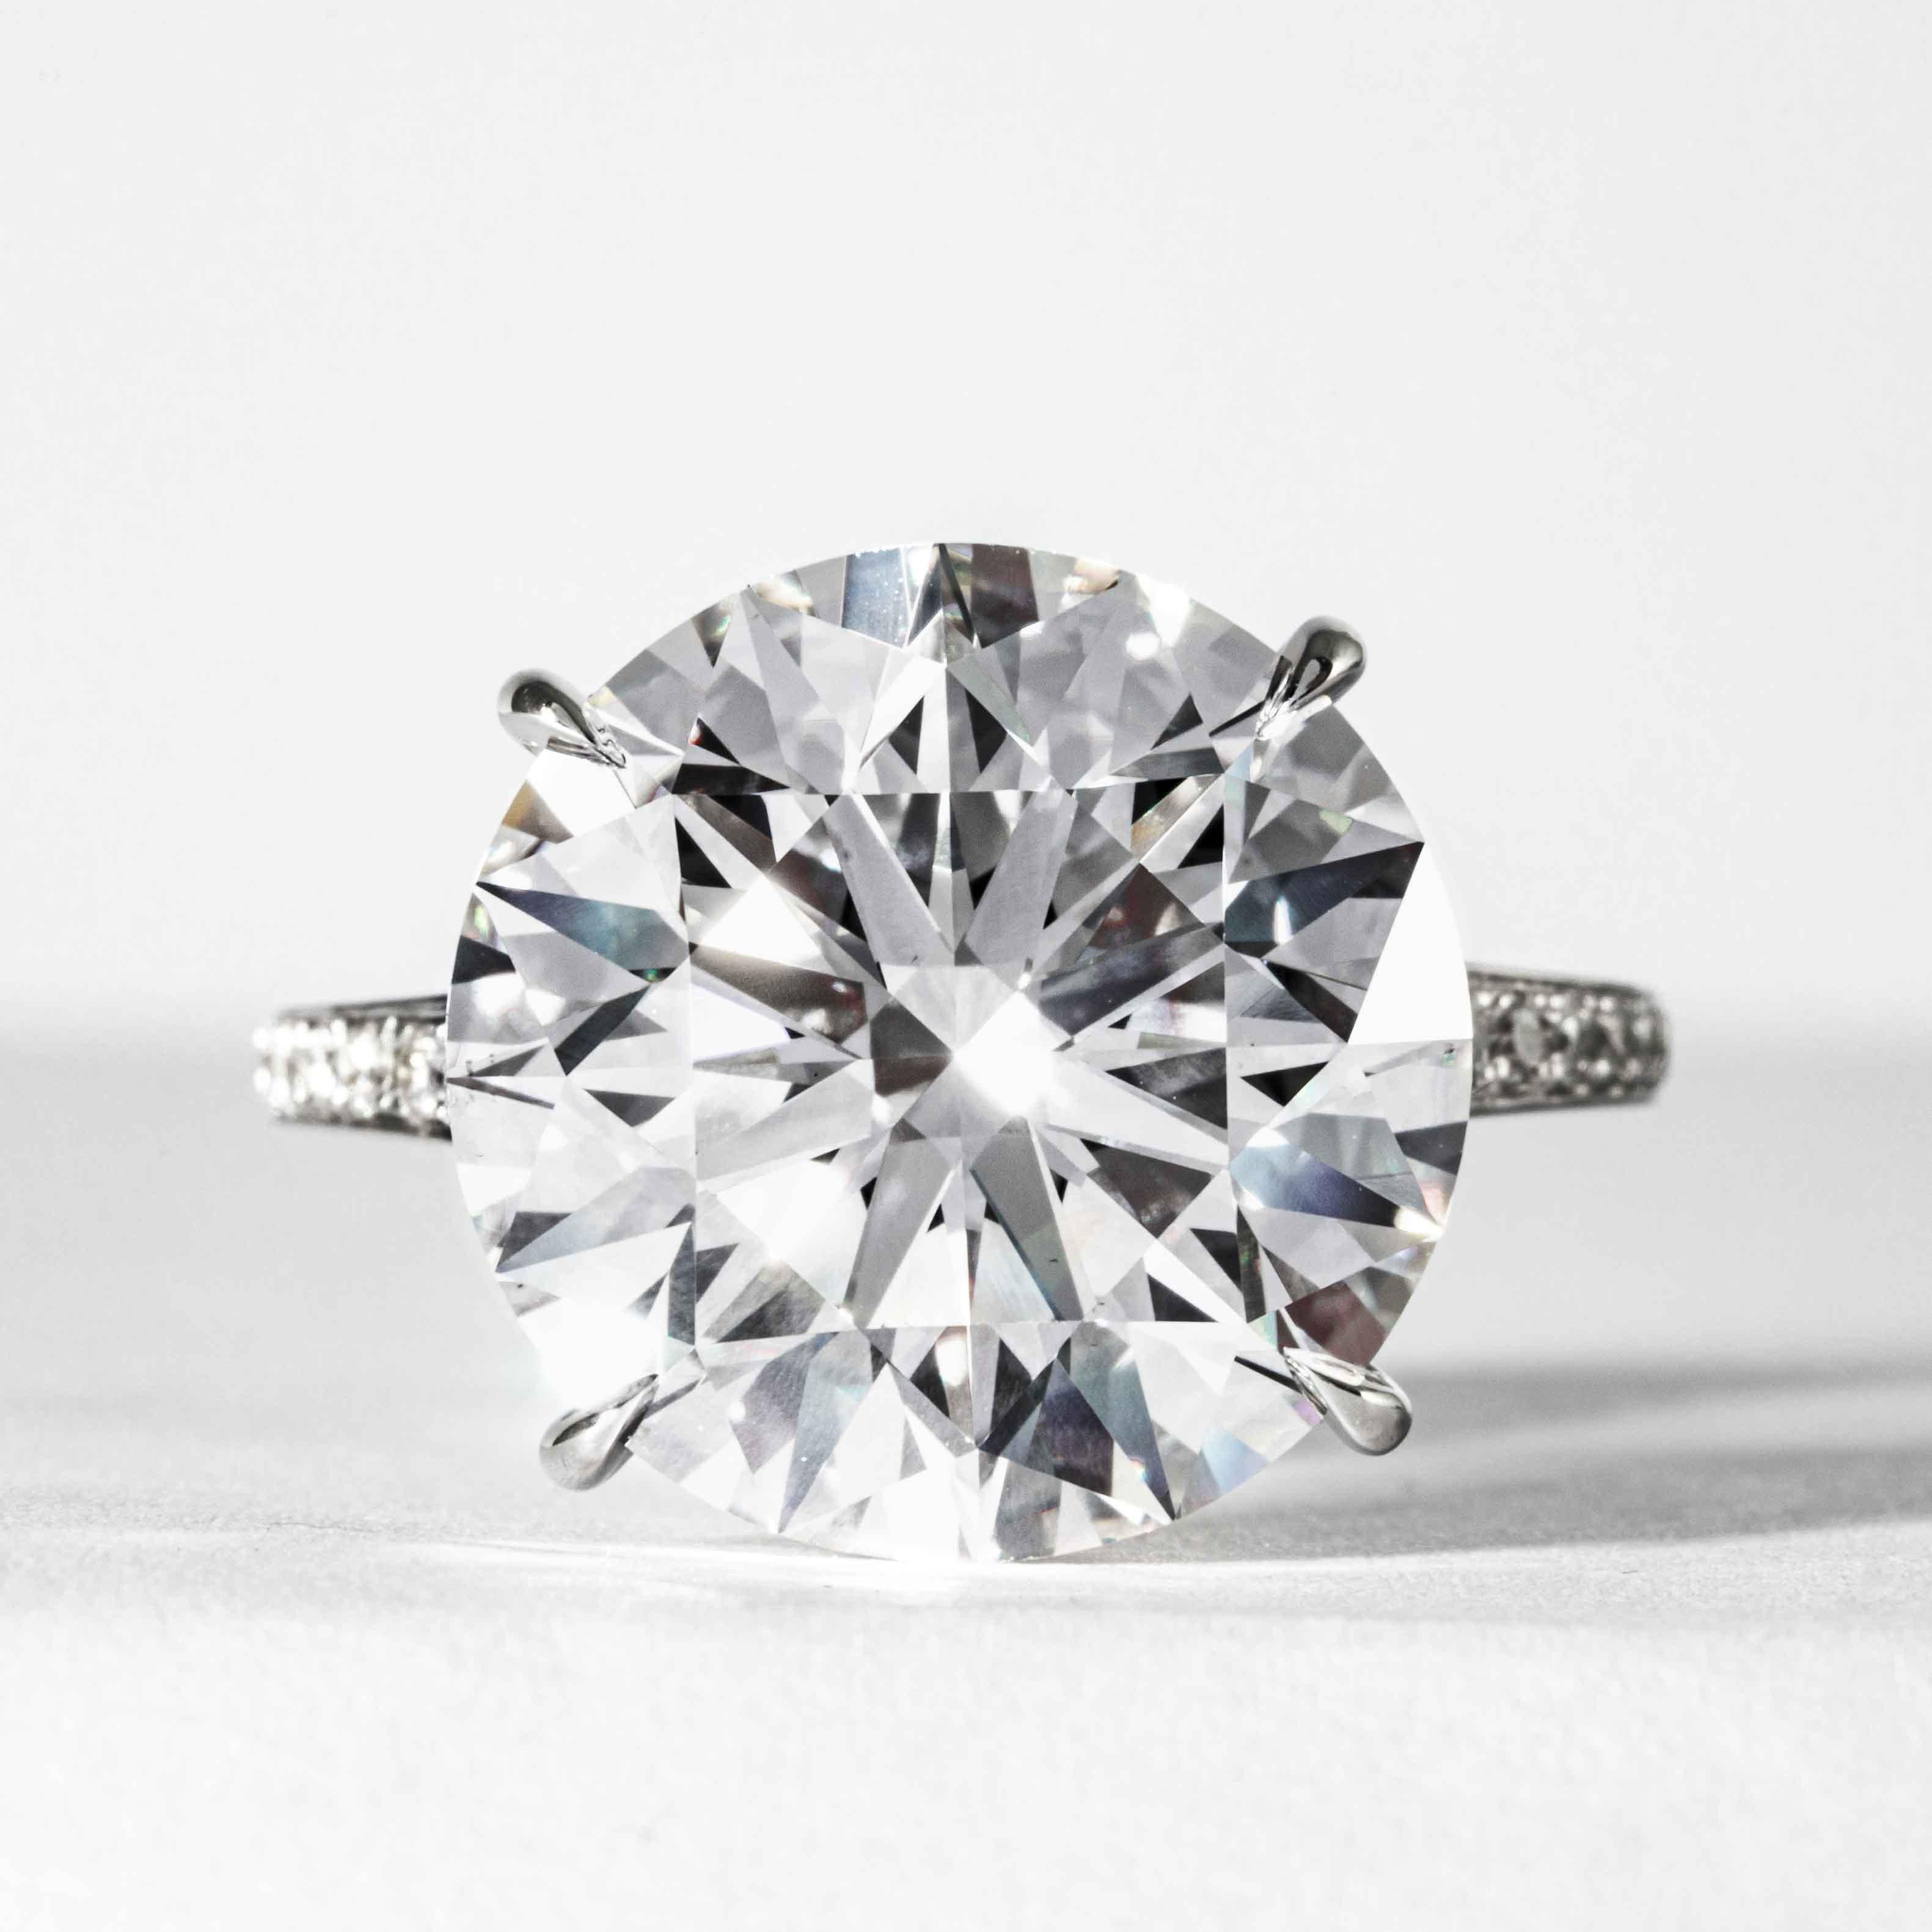 This spectacular diamond ring is offered by Shreve, Crump & Low. This 10.77 carat GIA certified F VS1 round brilliant cut triple excellent diamond measuring 14.02 - 14.11 x 8.83 mm is custom set in a handcrafted Shreve, Crump & Low platinum and